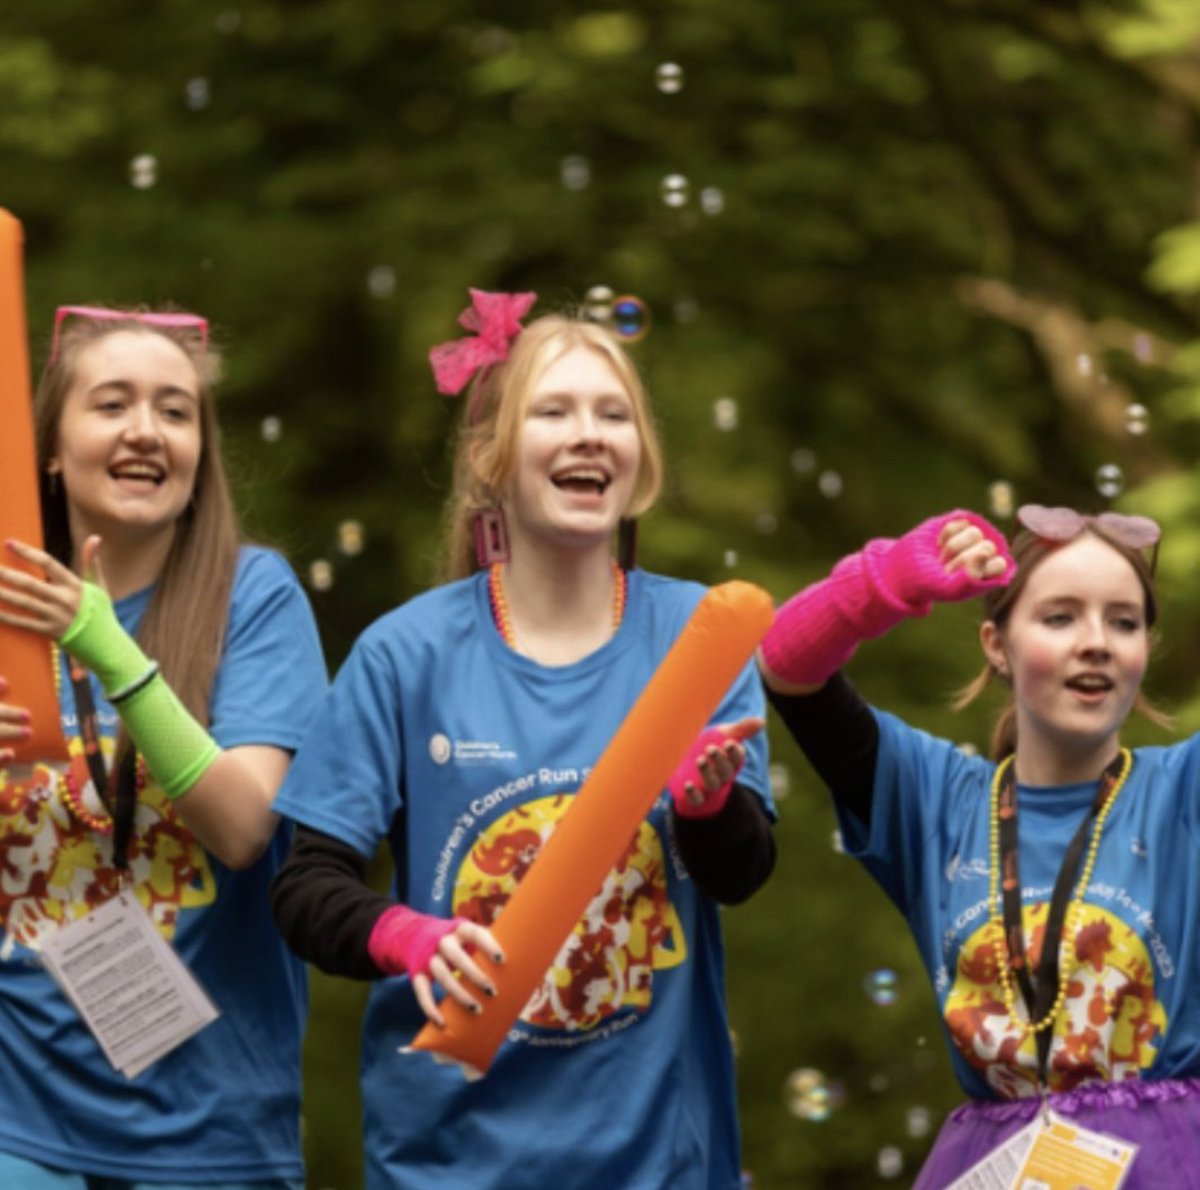 We need your help! We're looking for Children's Cancer Run volunteers to help on Sunday 19th May. Roles include waving off runners, staffing the Event Info area, car park marshalling & much more! 📧 Contact neville@childrenscancernorth.org.uk by March 31st to discuss.